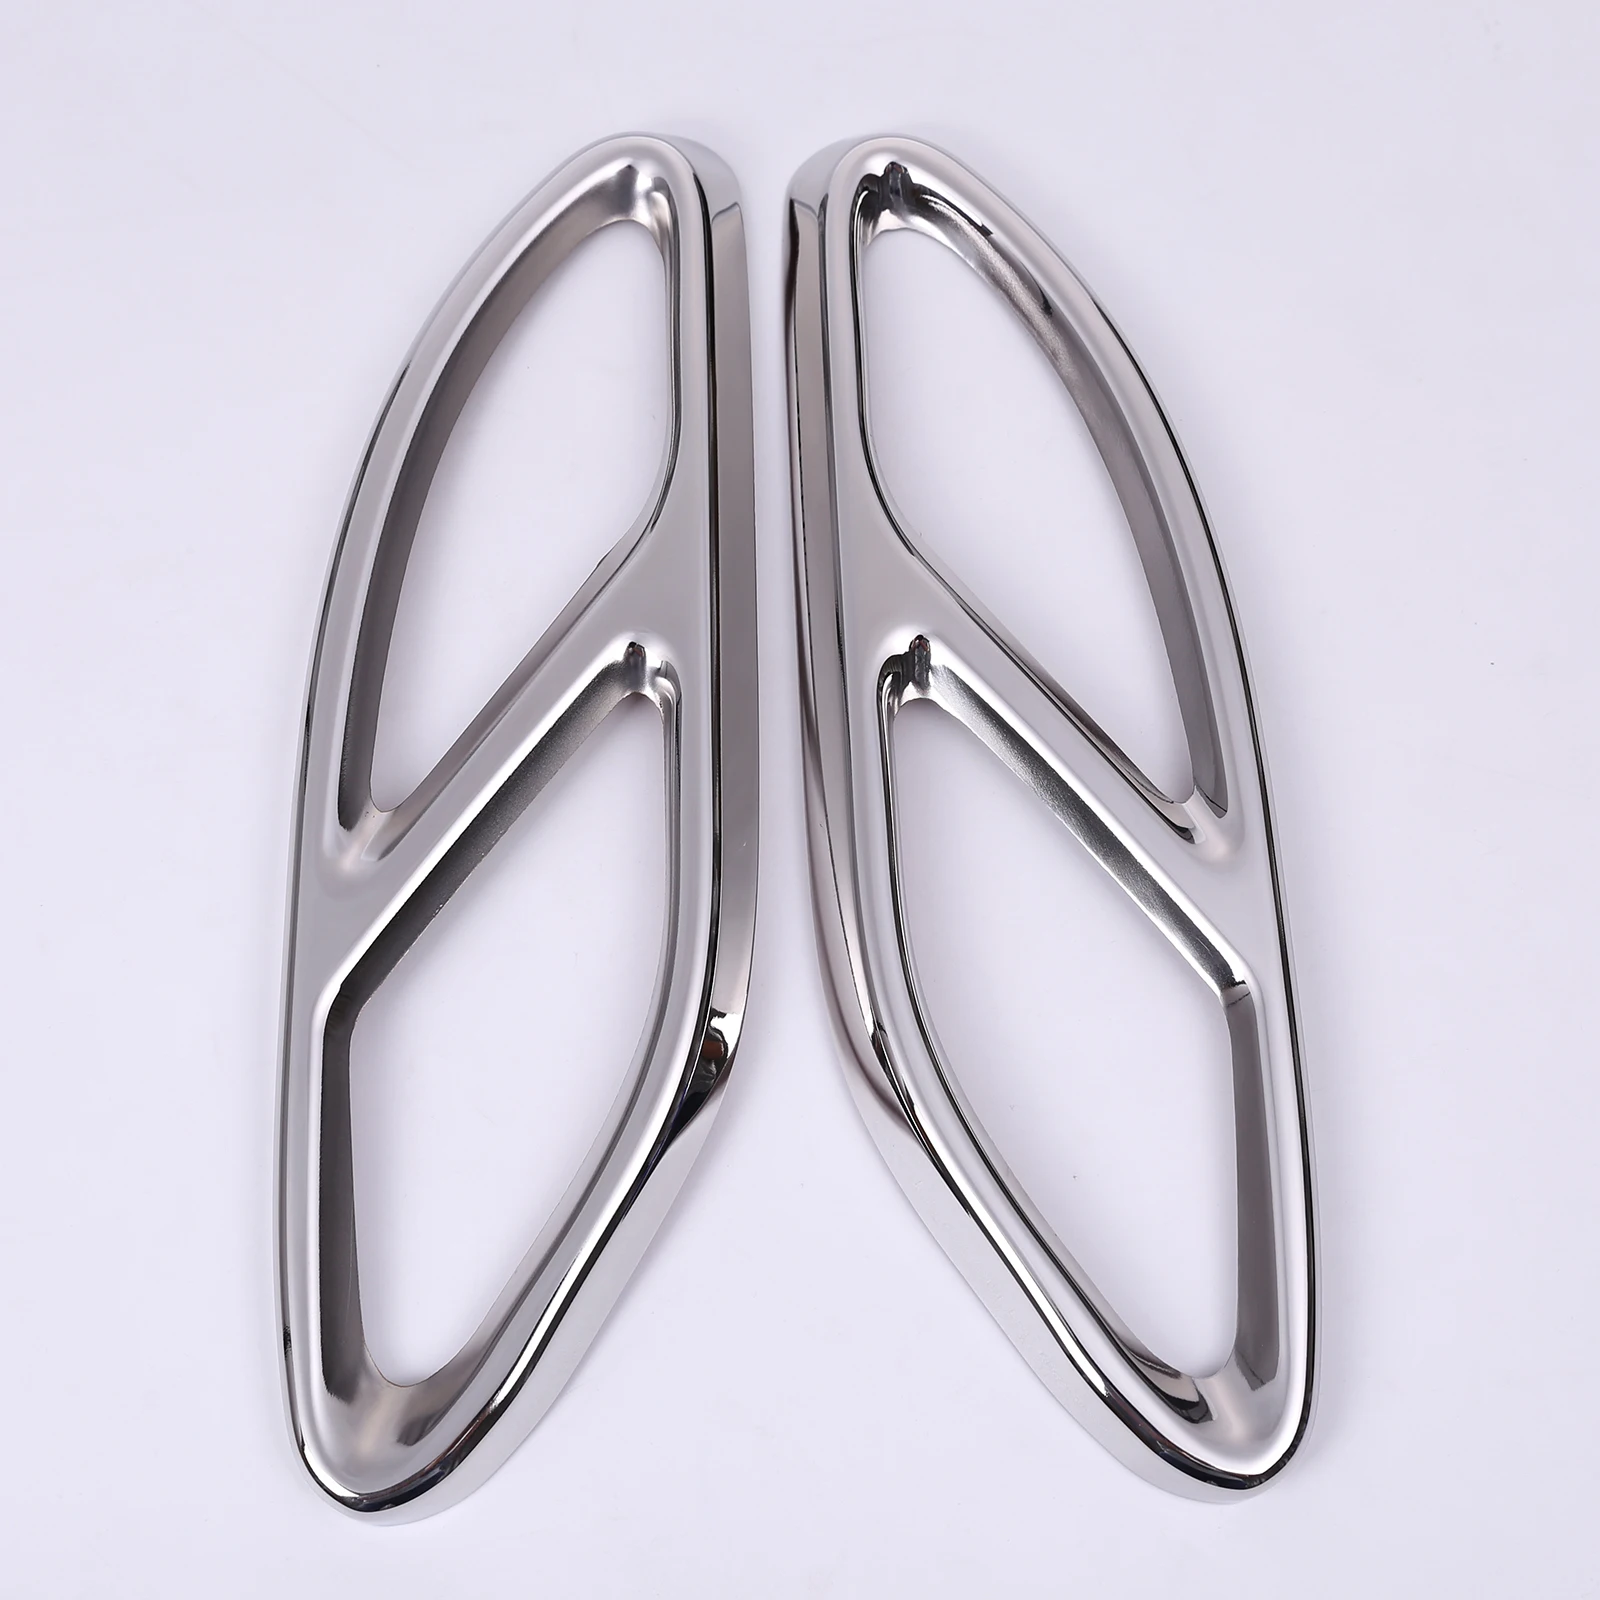 2Pcs Exhaust Pipe Cover Stainless Steel Muffler Fit for W205 Coupe 2015-2019